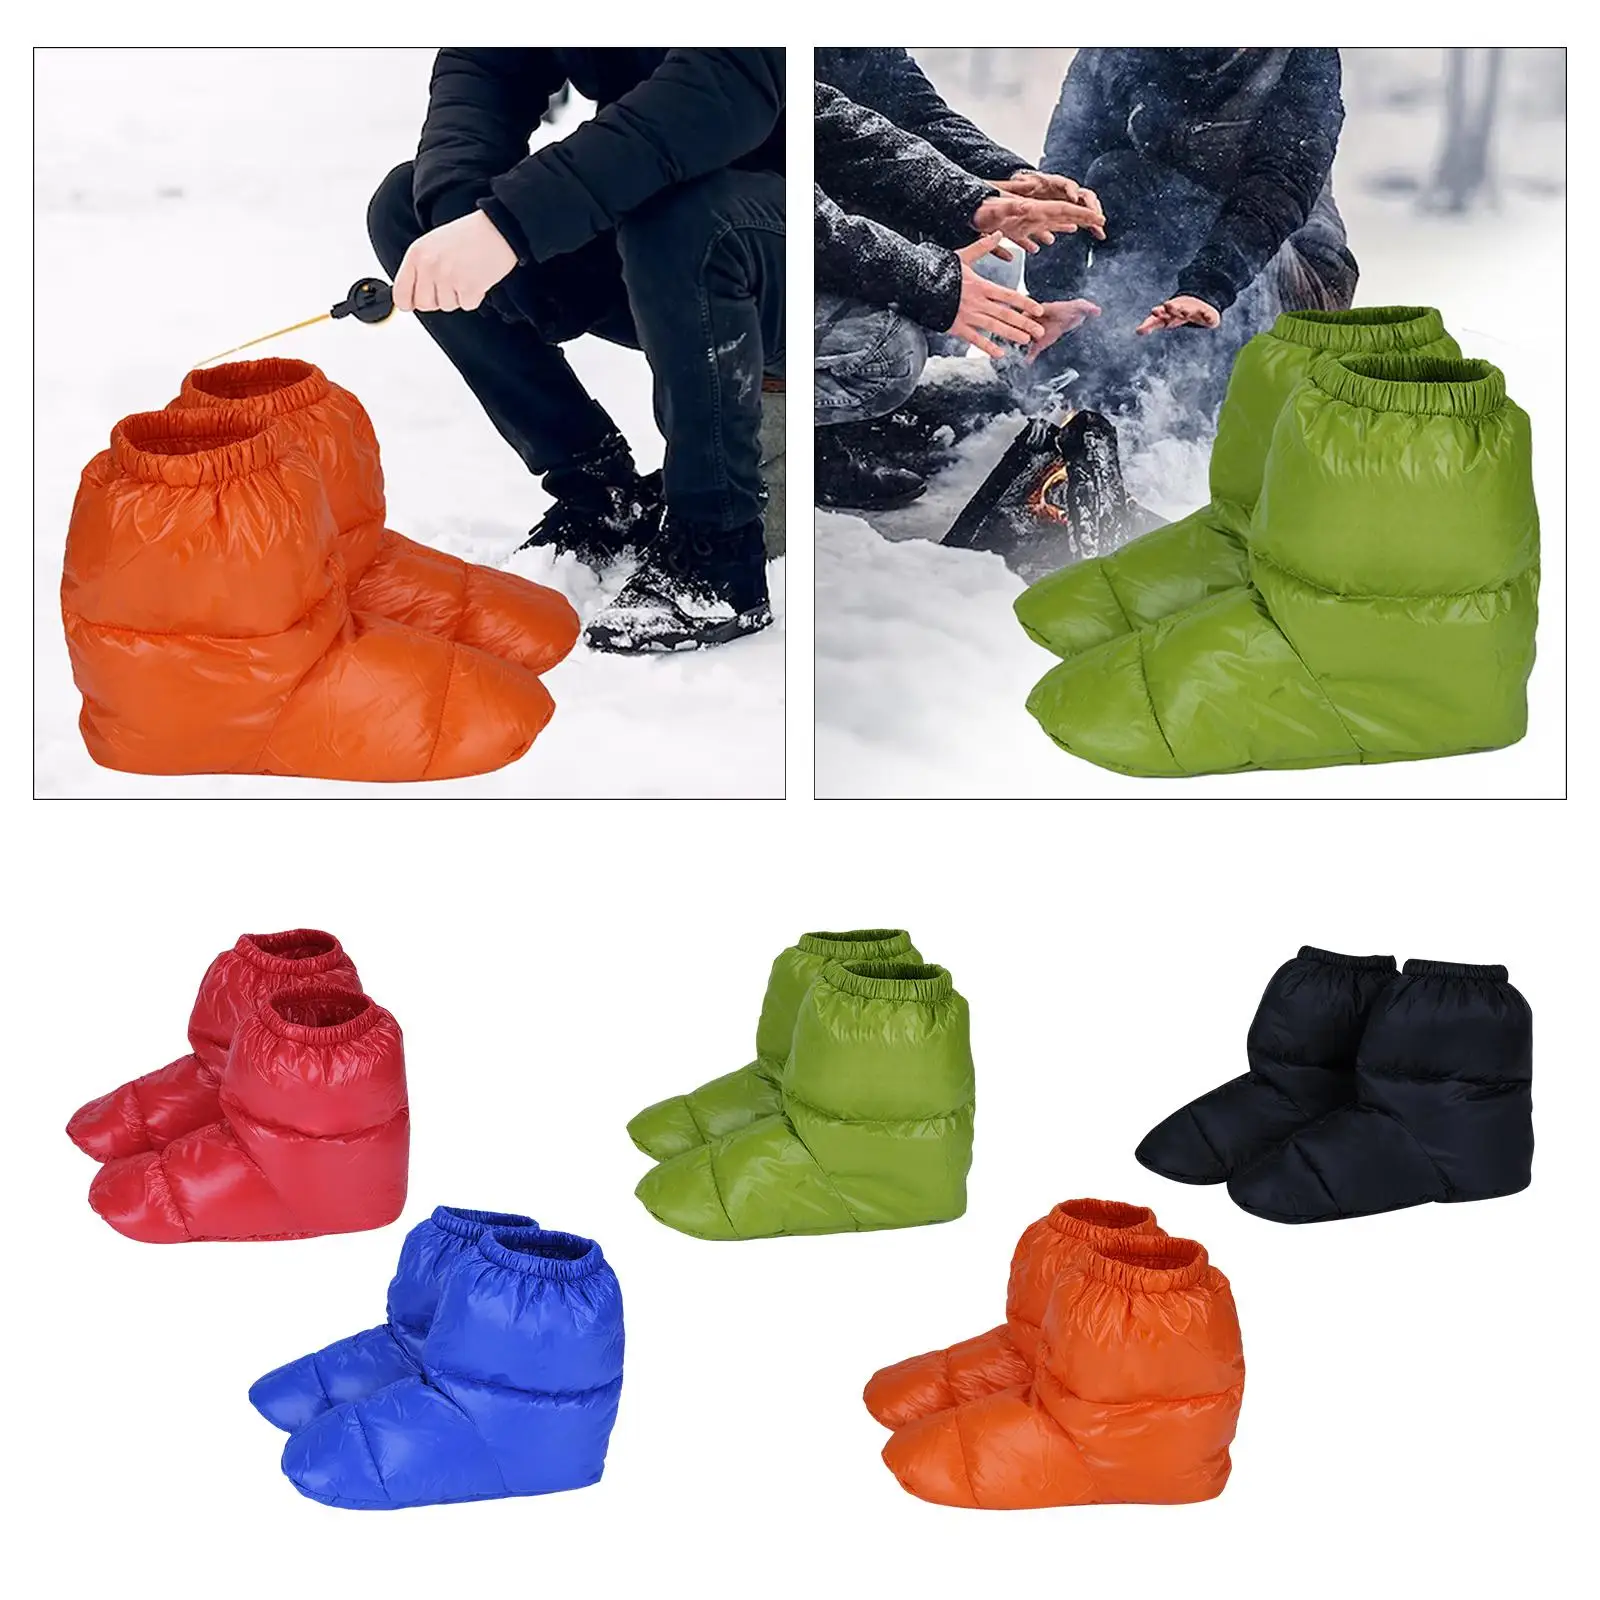 1 Pair Winter Down Slippers Warm Bootie Shoes Comfortable Ultralight Ankle Snow Boots for Bedroom Fishing Hiking Office Skiing